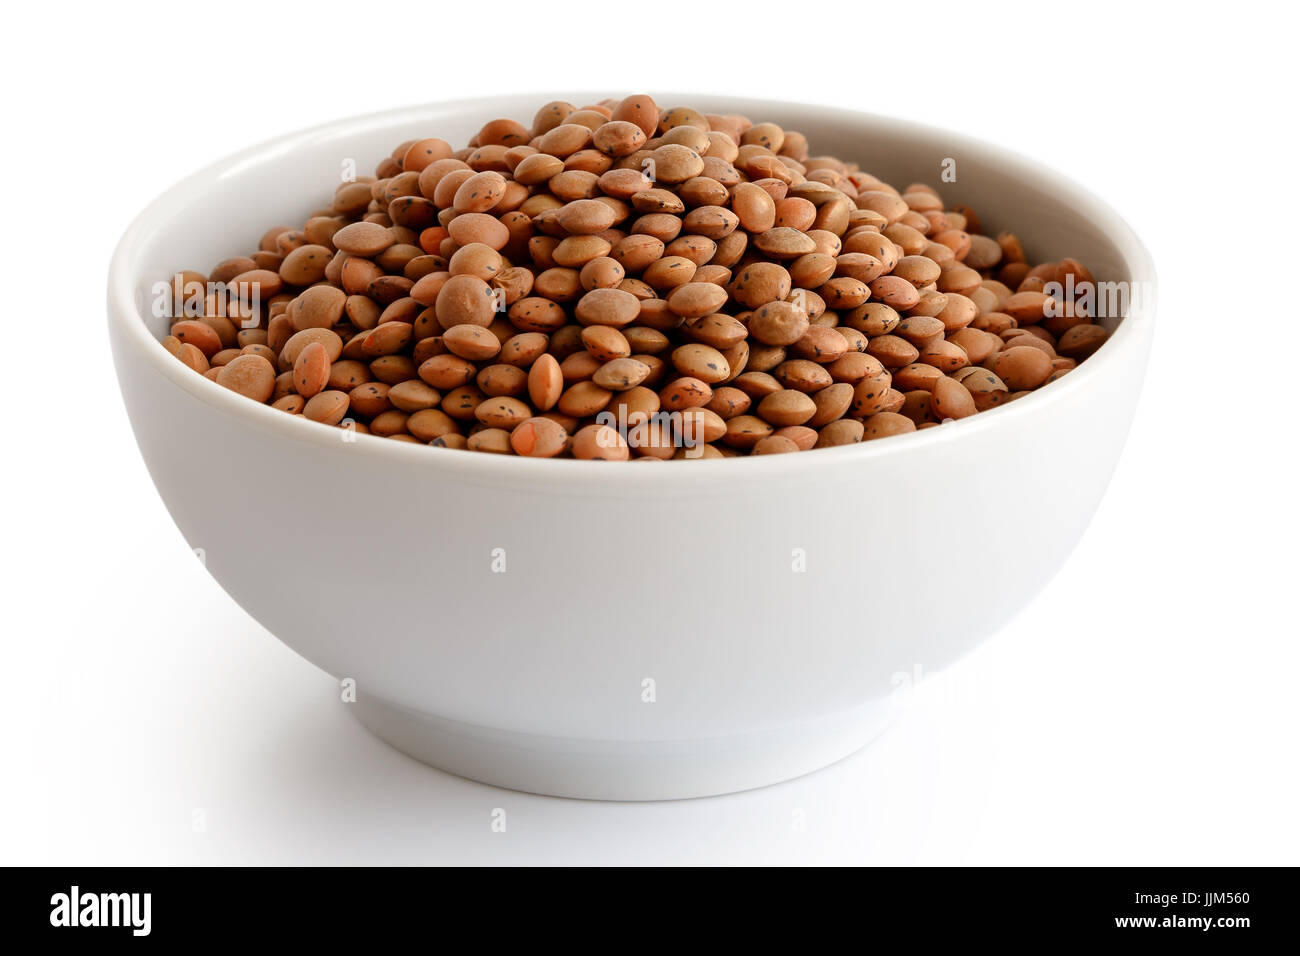 Dry unpeeled red lentils in white ceramic bowl isolated on white. Stock Photo